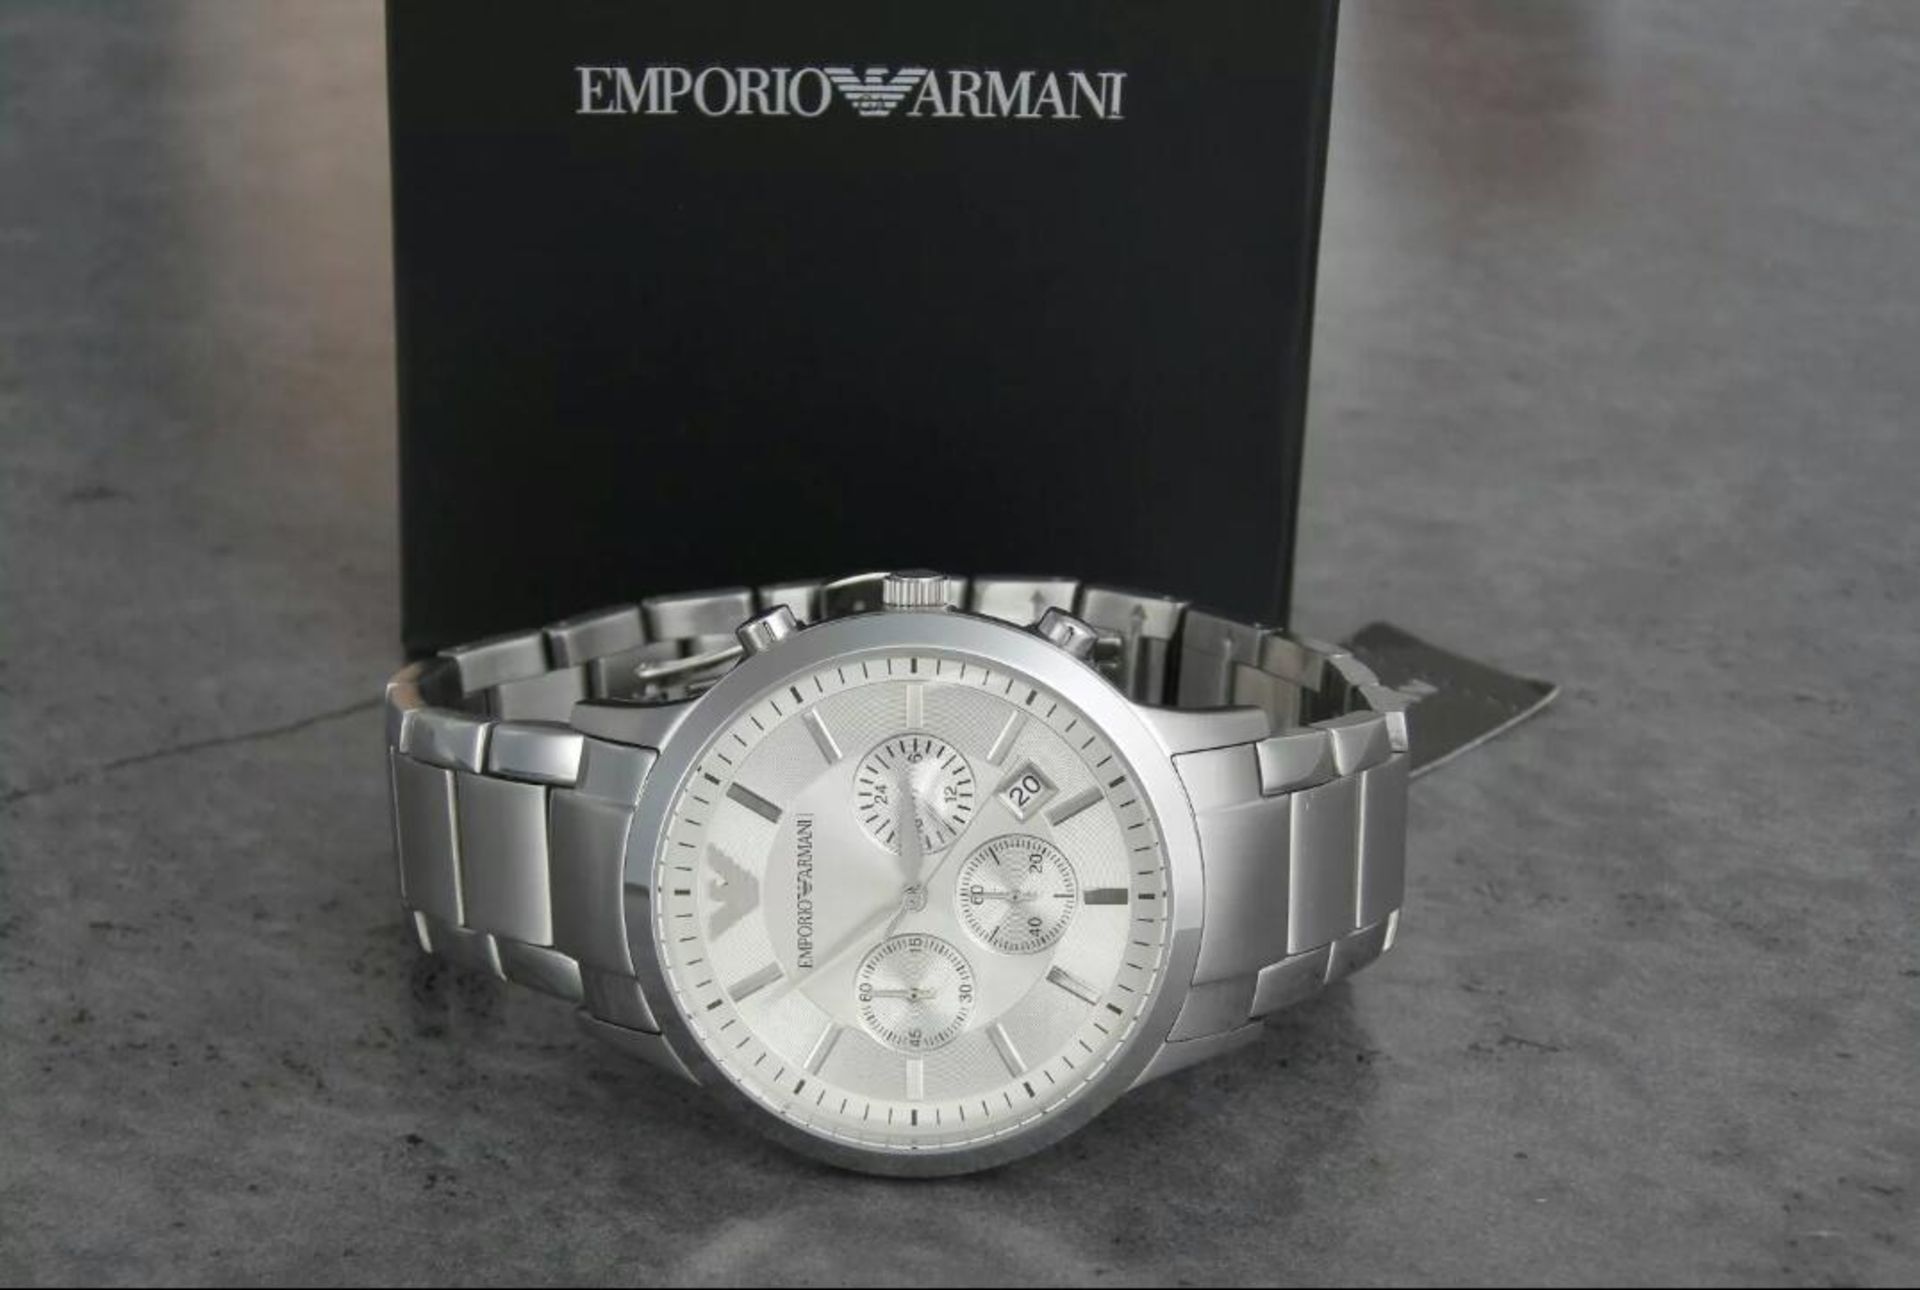 6 X BRAND NEW EMPORIO ARMANI DESIGNER WATCHES, COMPLETE WITH ORIGINAL ARMANI WATCH BOXES, MANUALS - Image 4 of 8